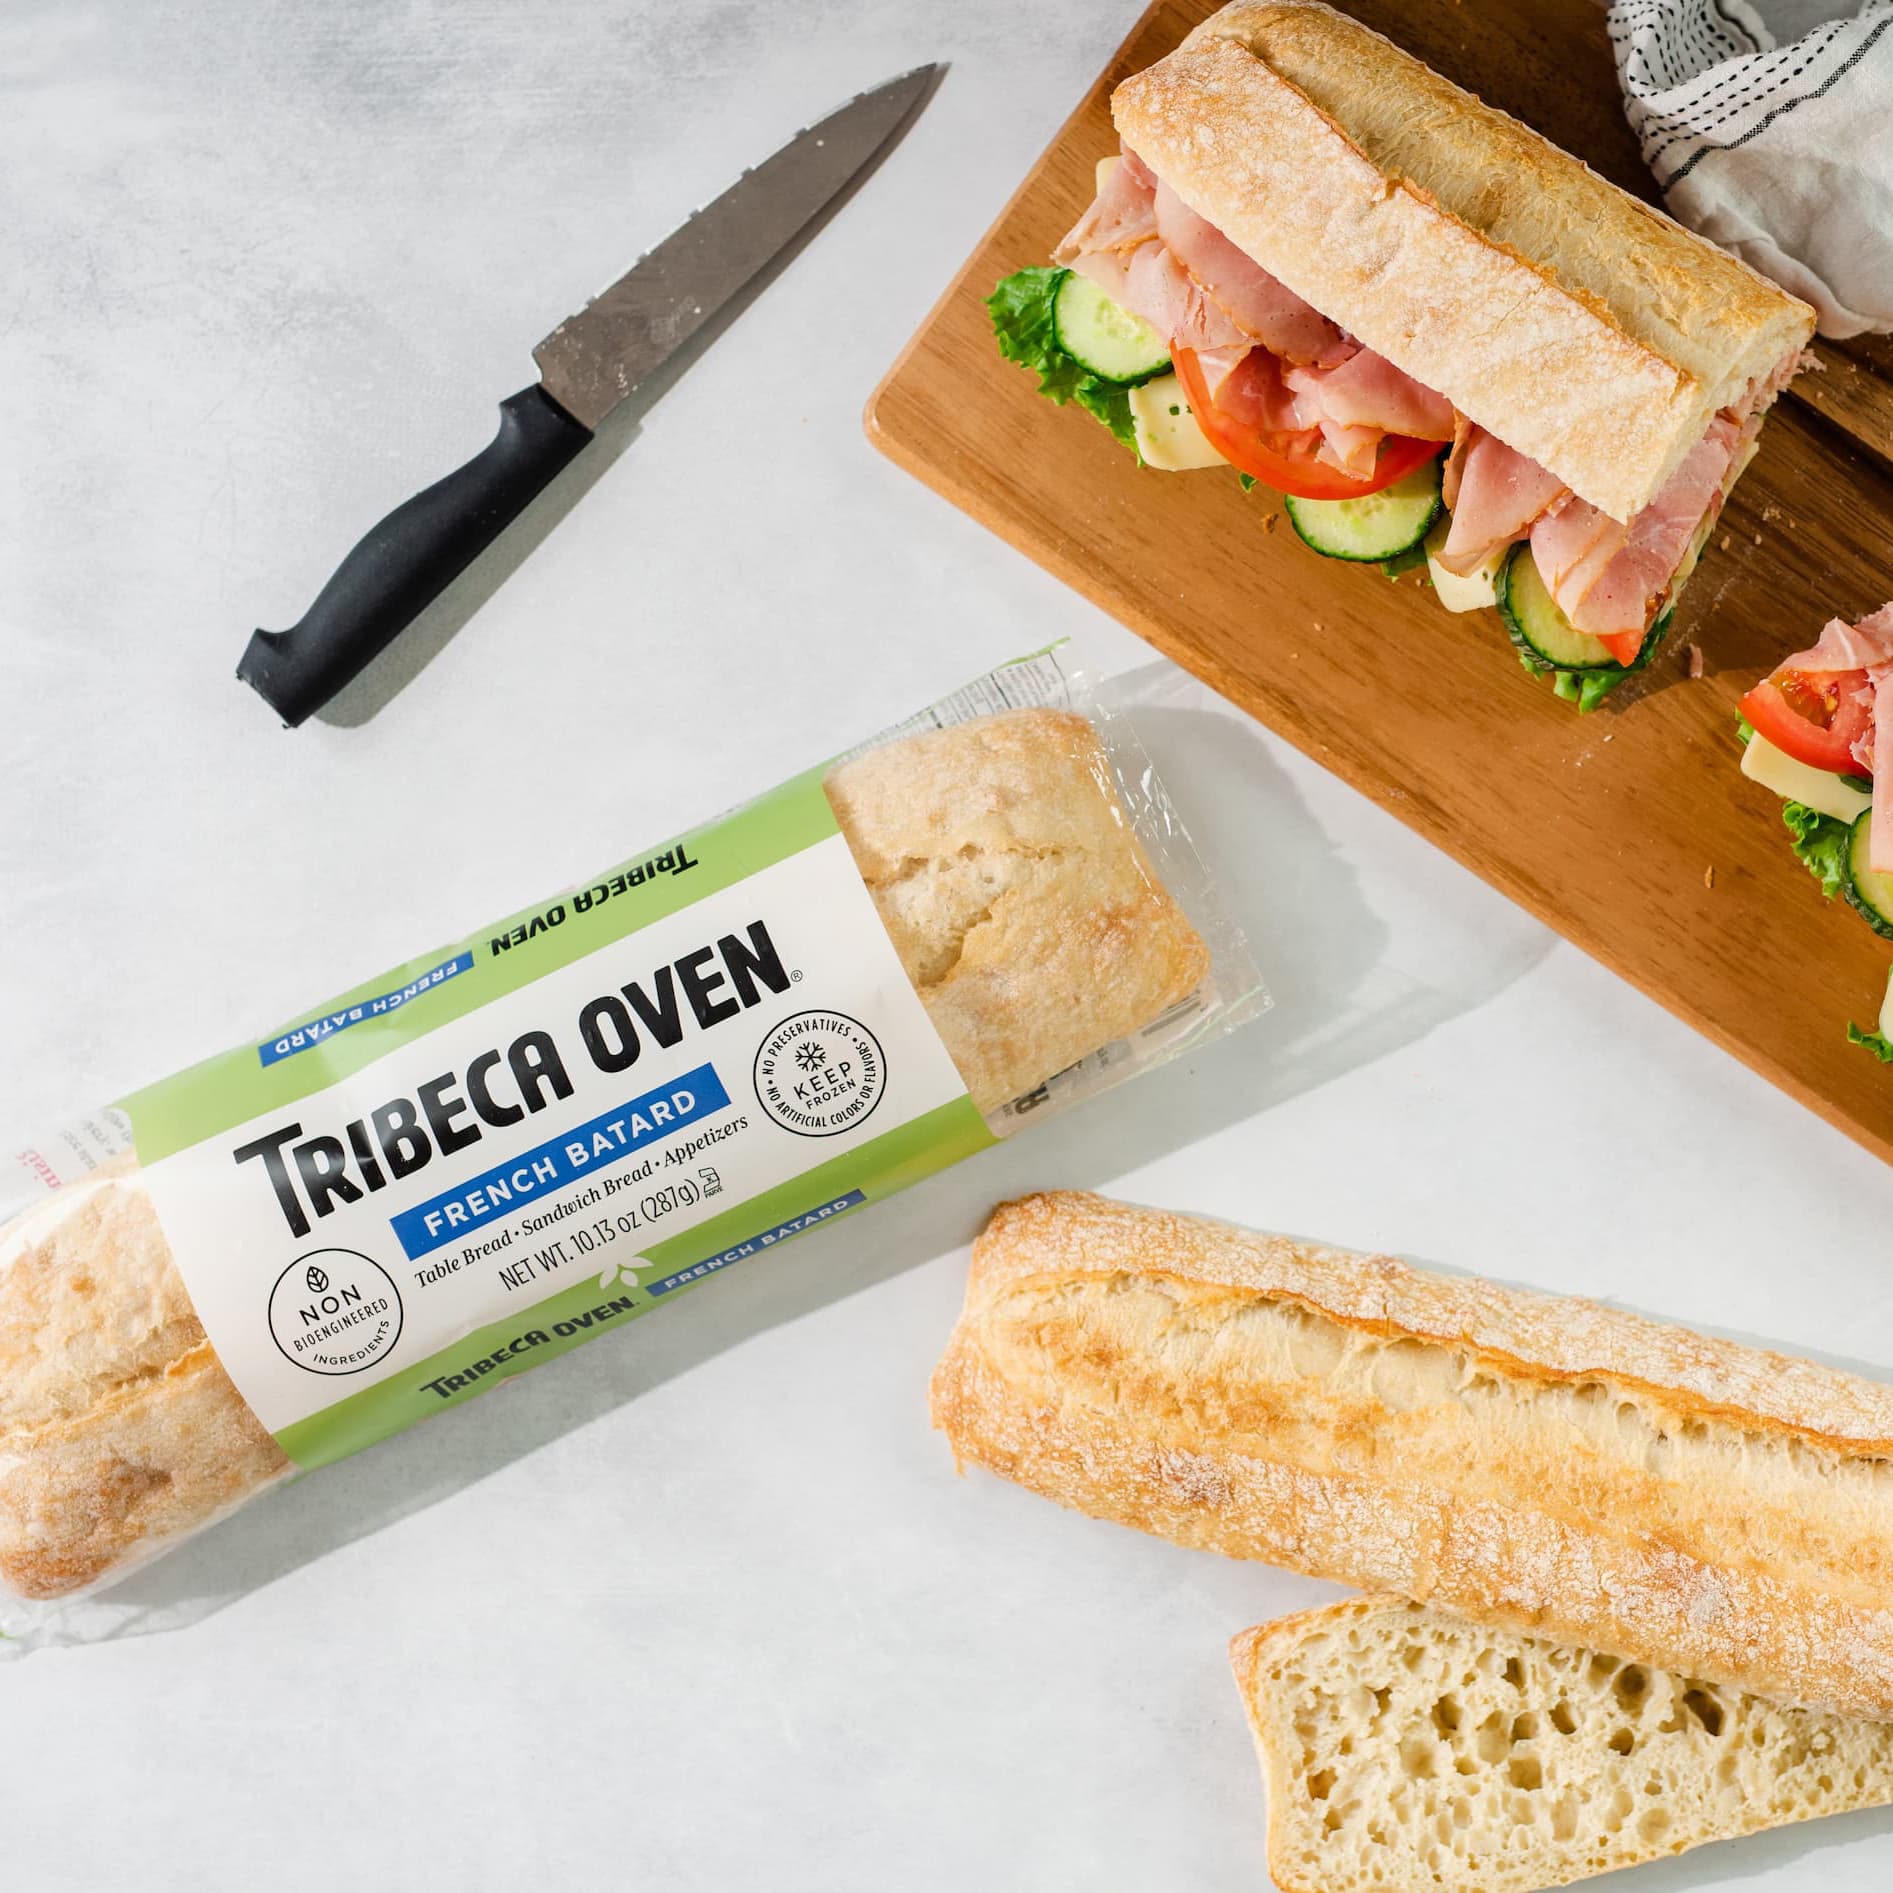 Tribeca Oven now in the Frozen Food Section